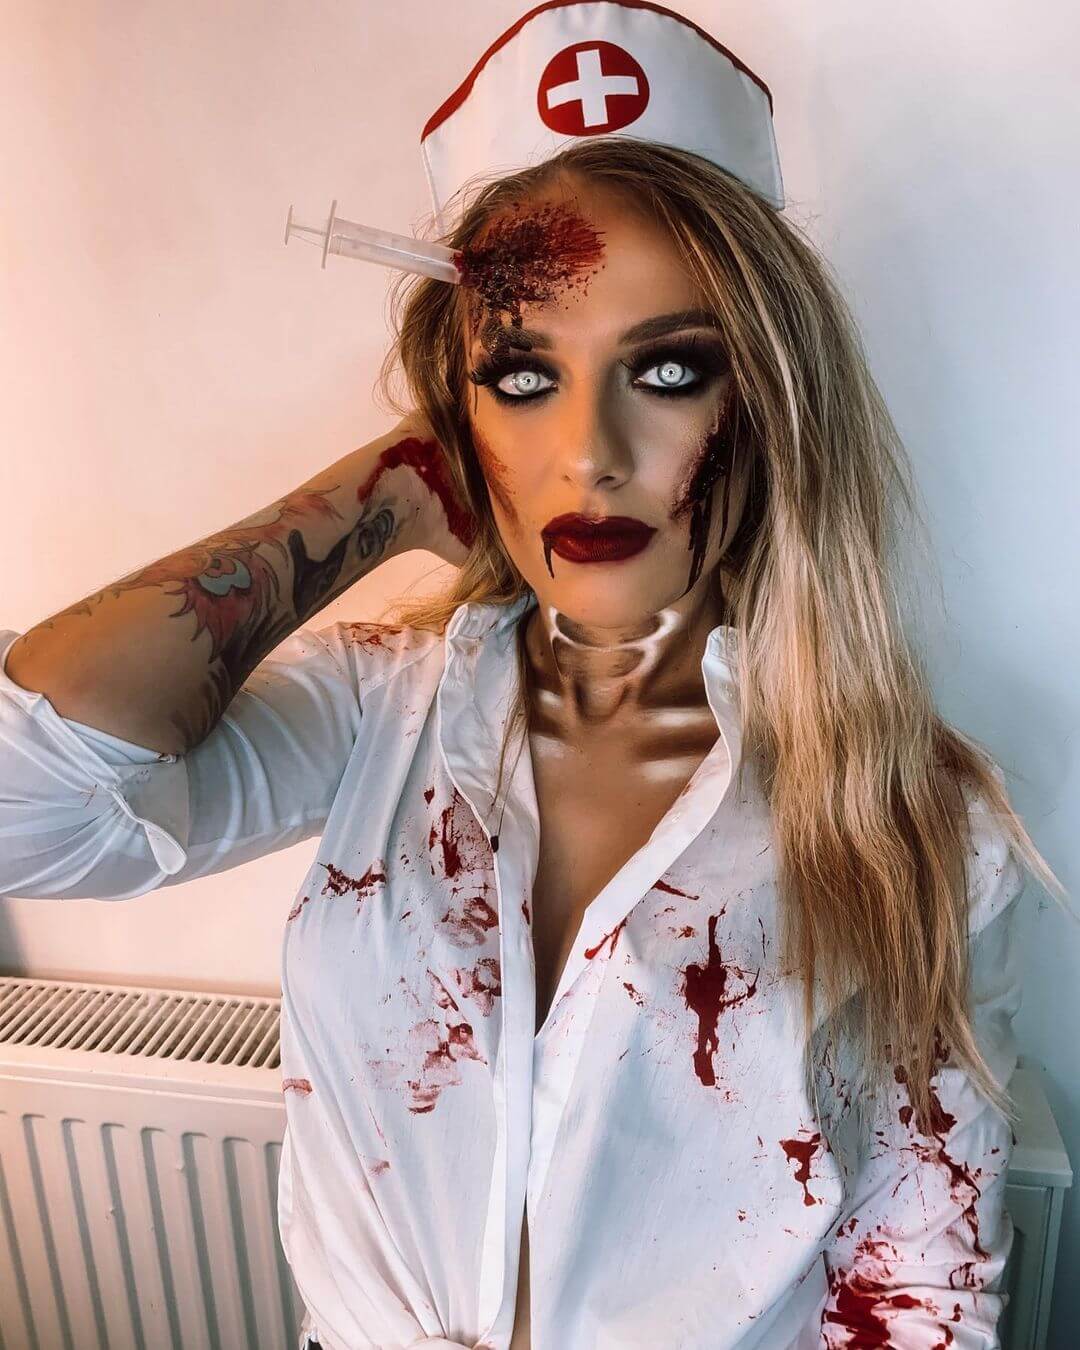 A scary zombie nurse with a bloody twist served Halloween right this year!